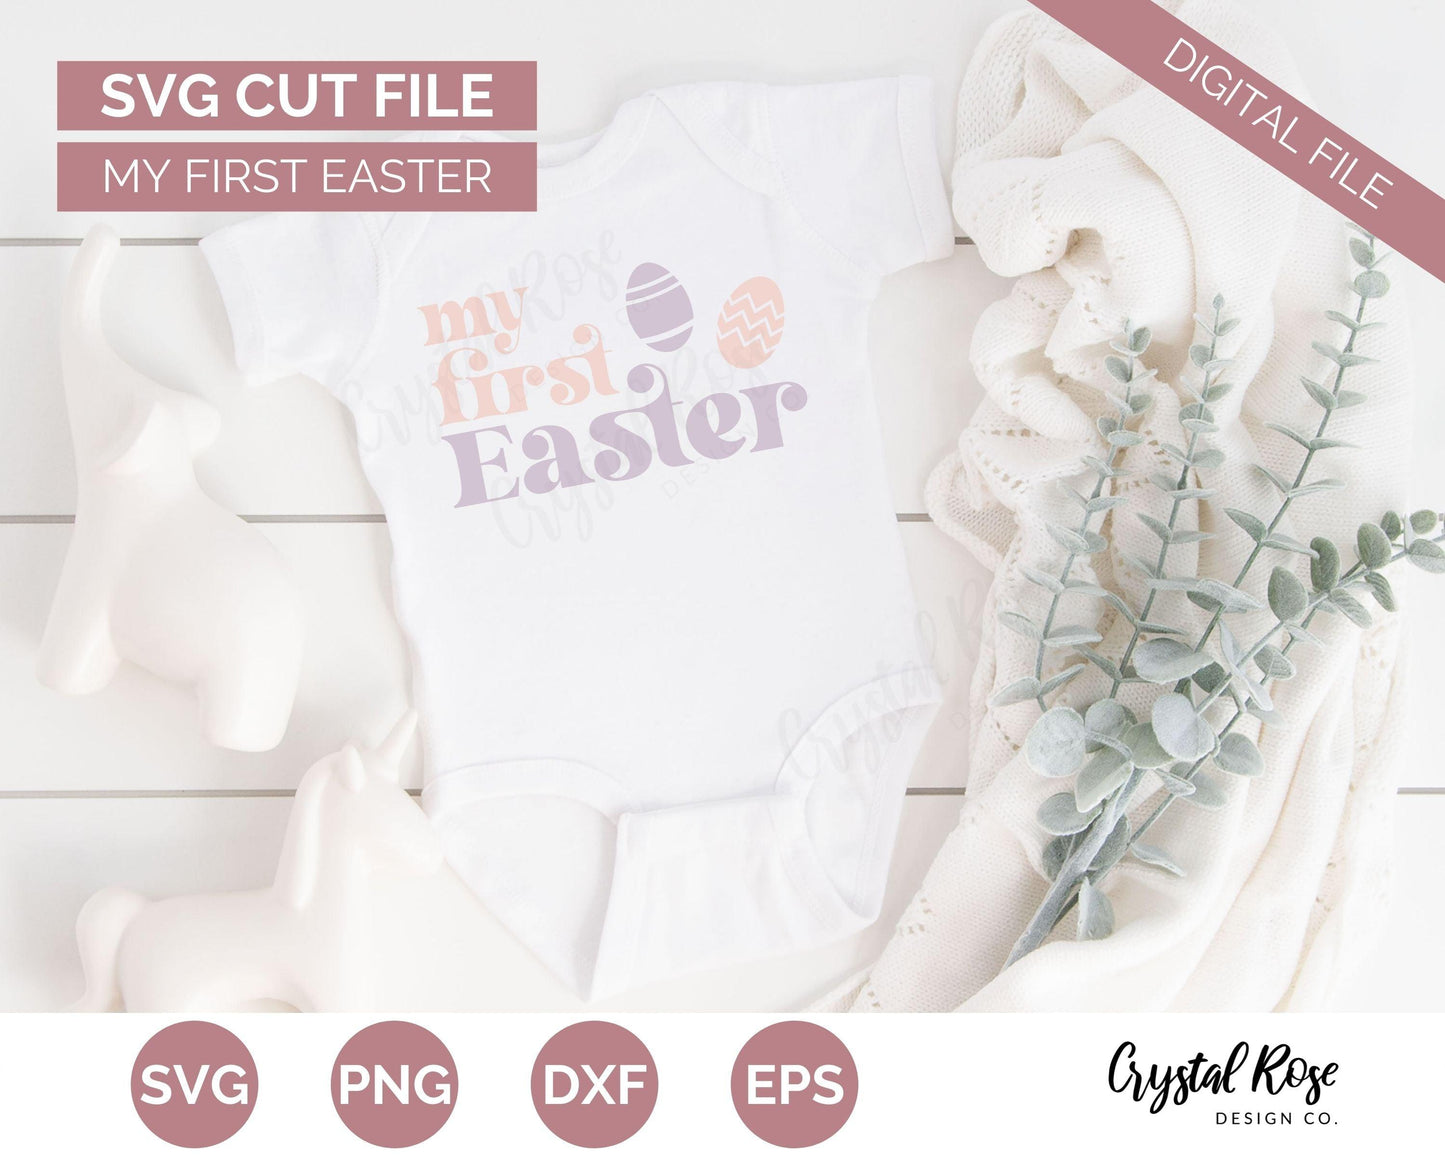 My First Easter SVG, Easter SVG, Digital Download, Cricut, Silhouette, Glowforge (includes svg/png/dxf/eps) - Crystal Rose Design Co.